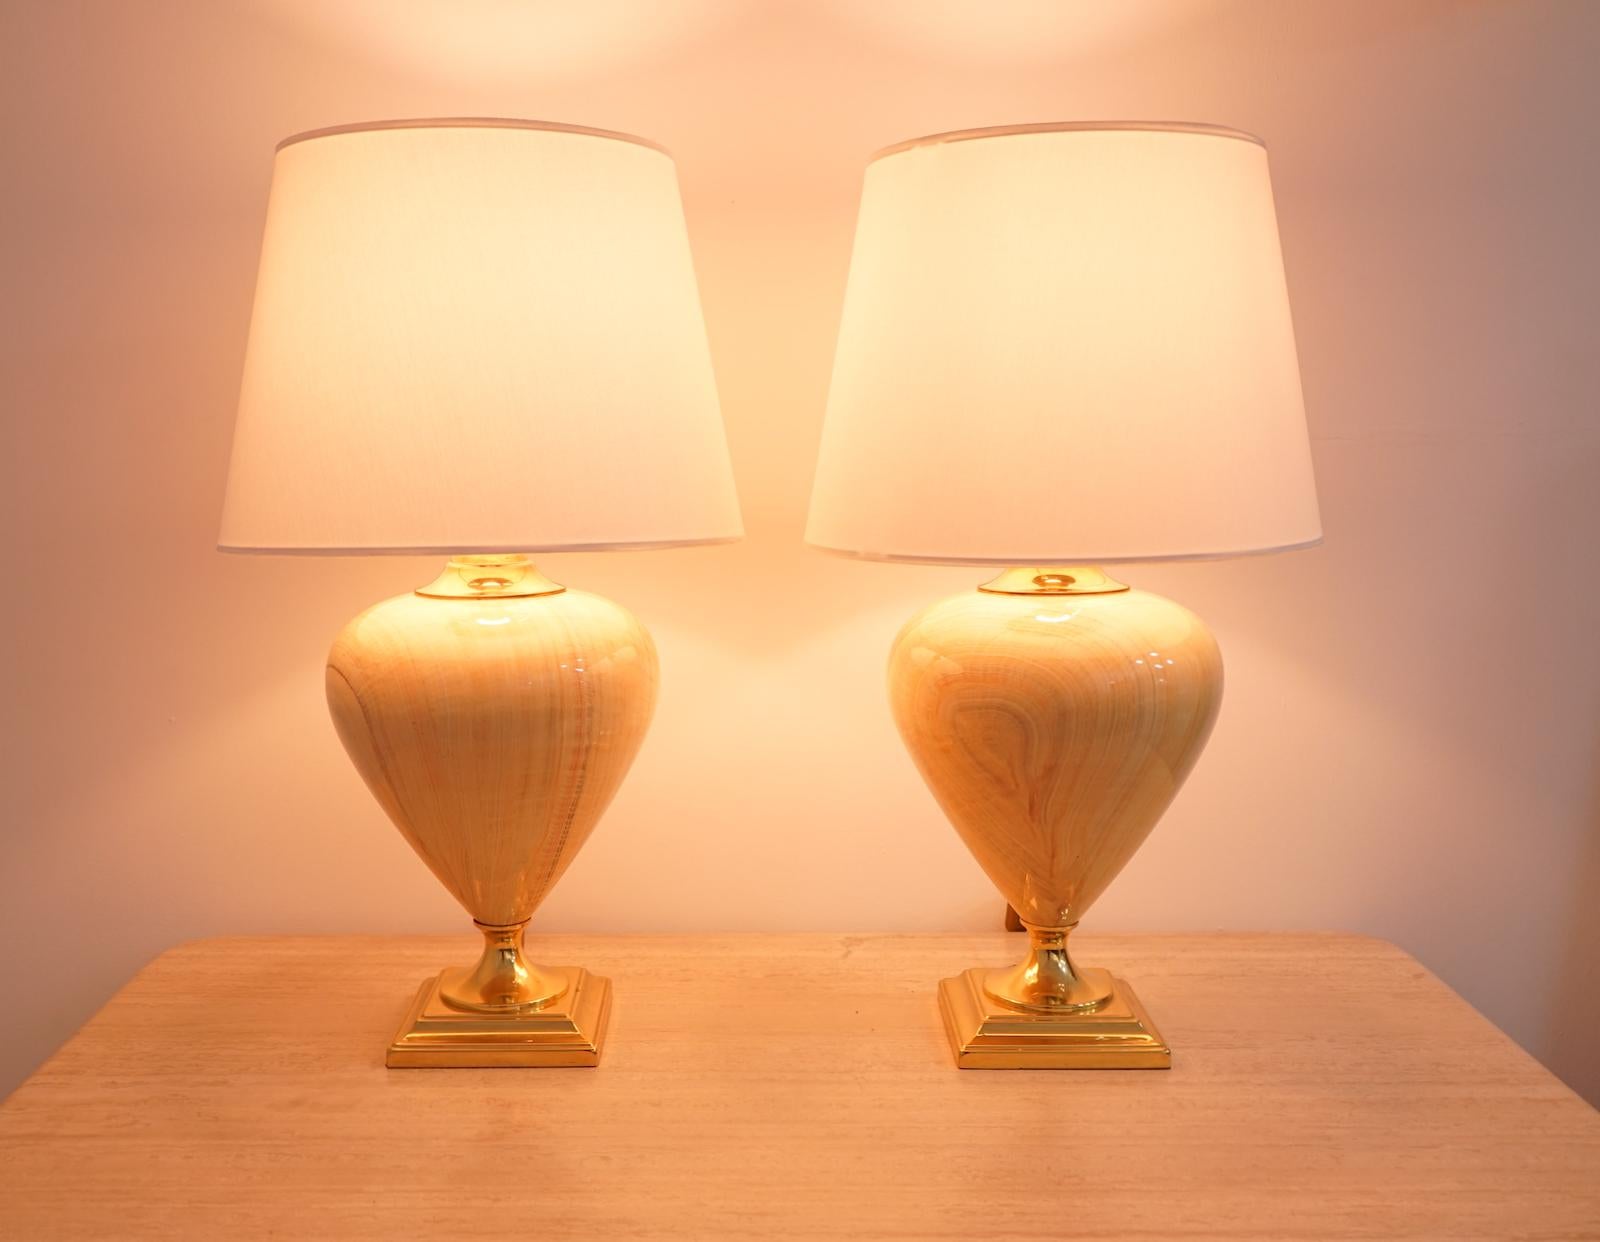 Beautiful pair of table lamps by Maison Le Dauphin, France, circa 1970s. Brass base and ceramic body in caramel color.
Good condition with small stains on the base (picture).

Dimensions: Height 29.23 in. (74 cm), diameter 17.32 in. (44 cm).
   